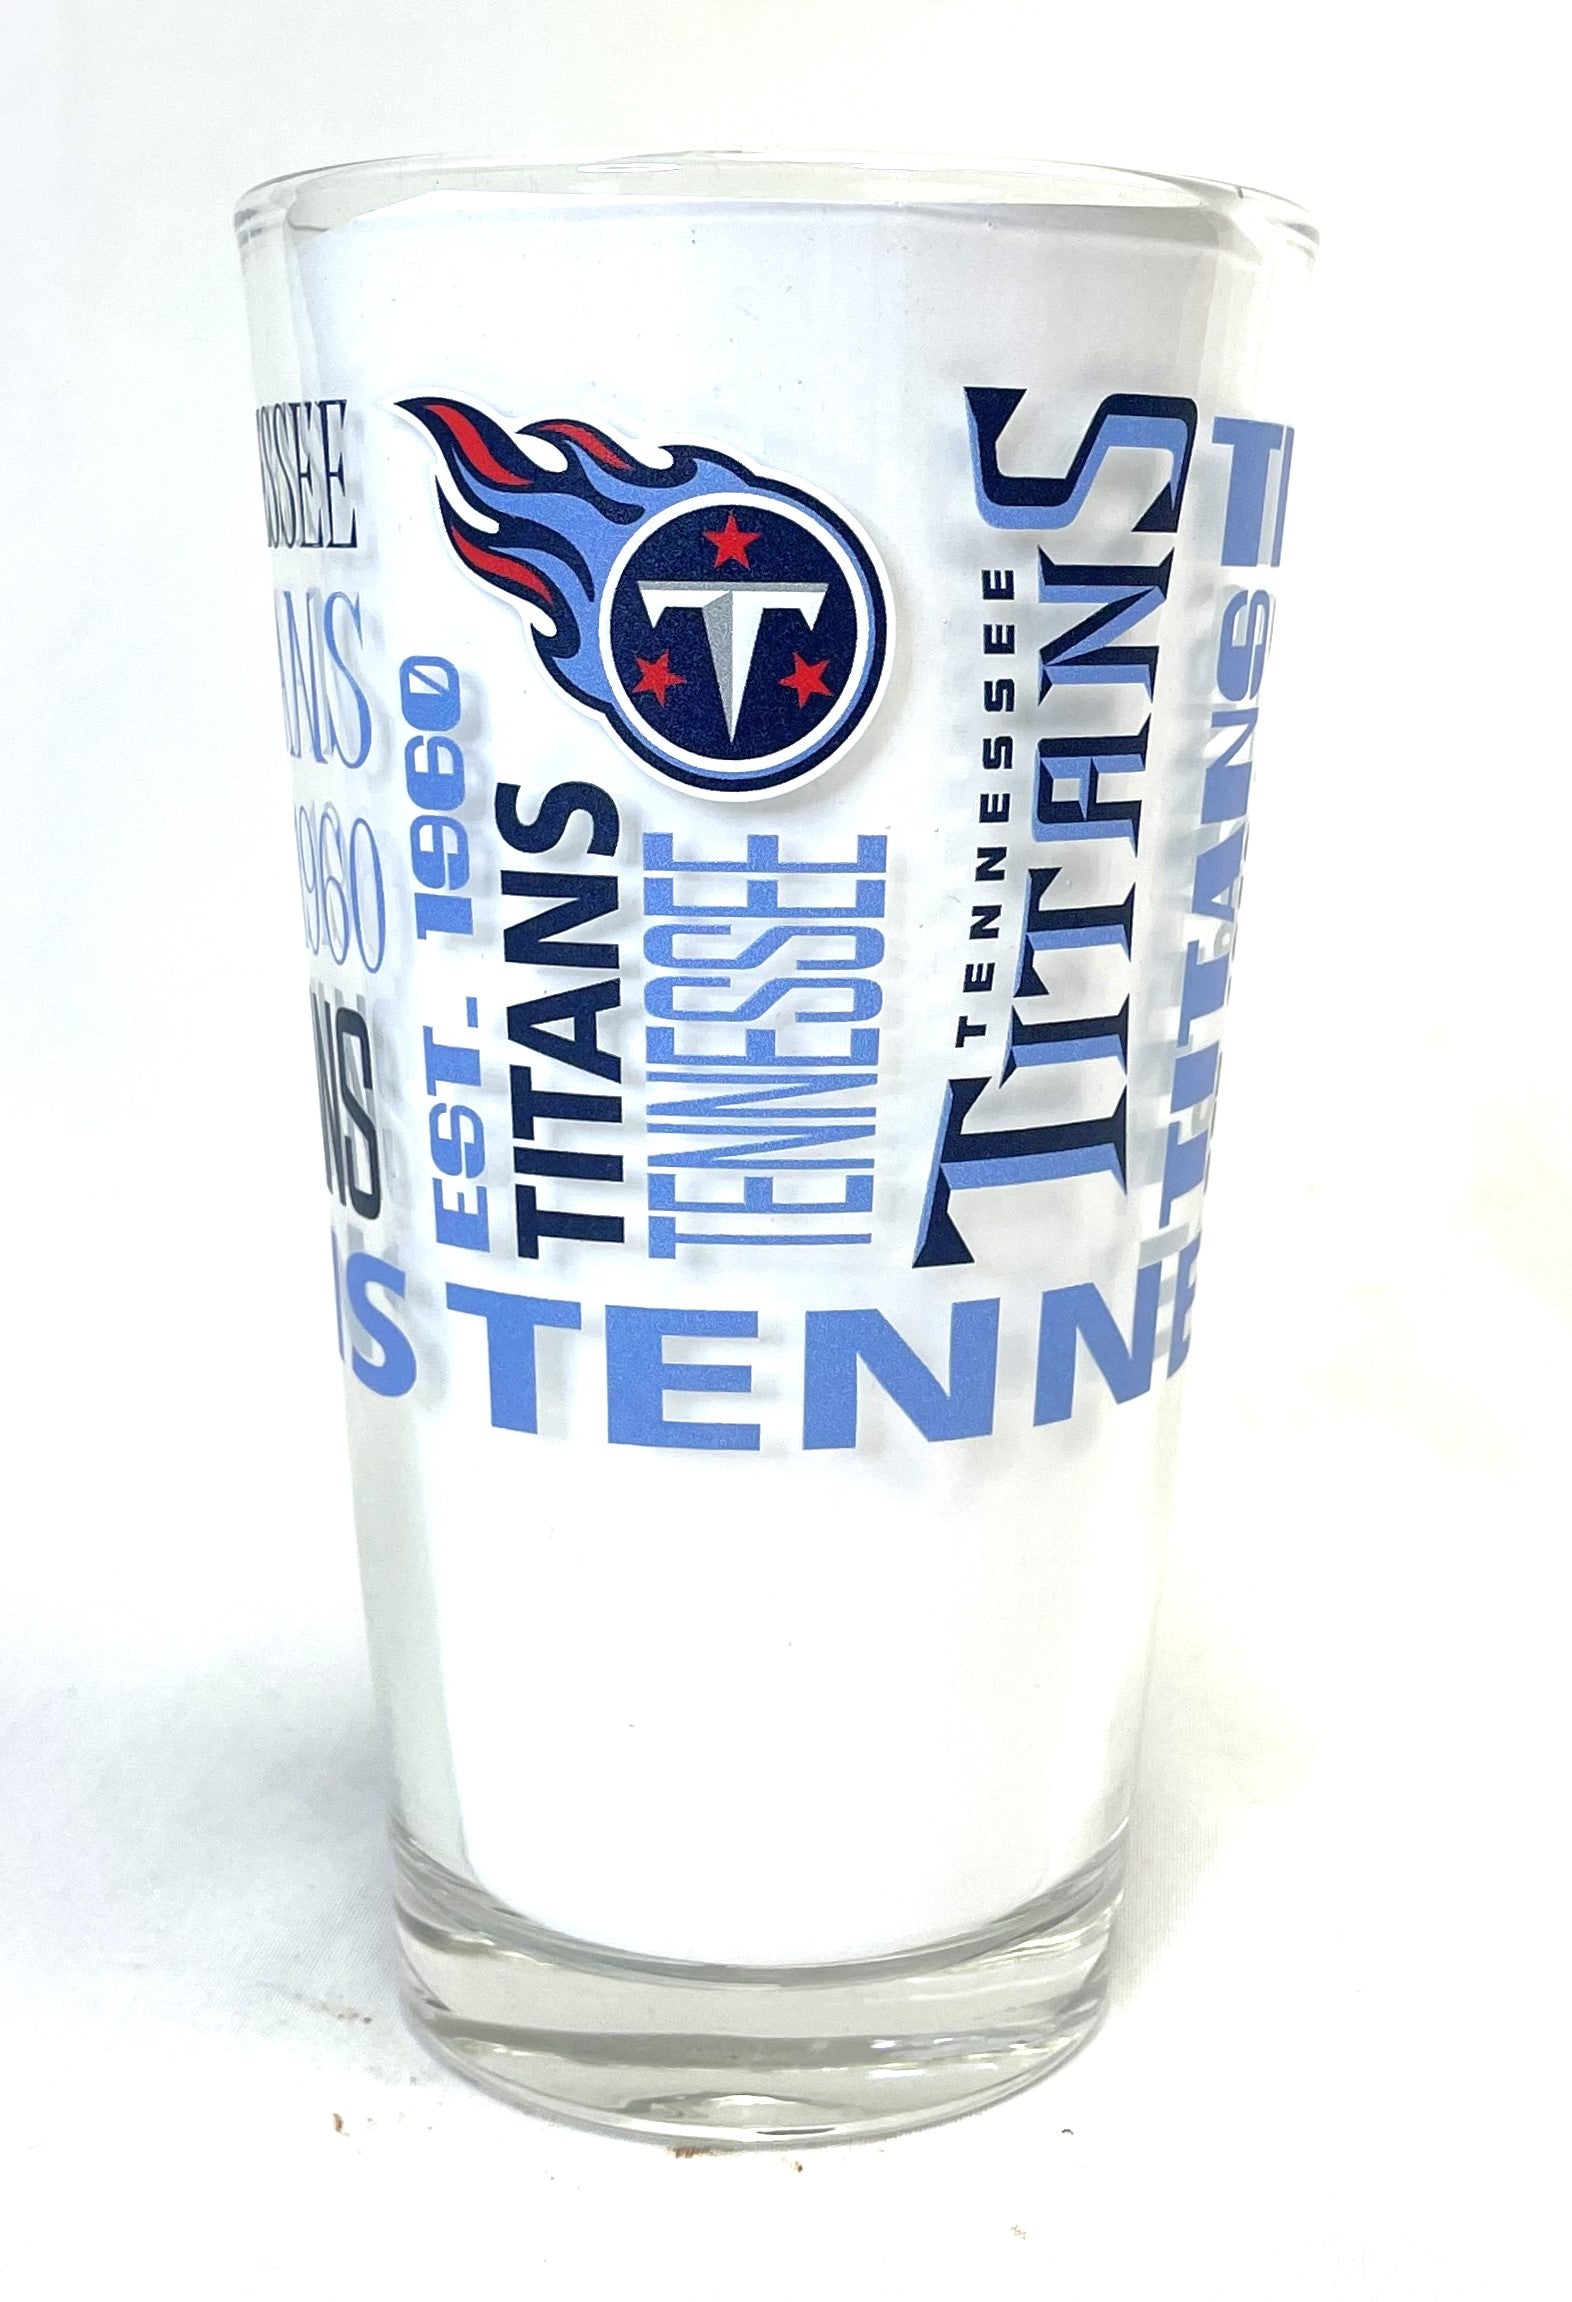 Tennessee Titans Pint Glass - $16.00